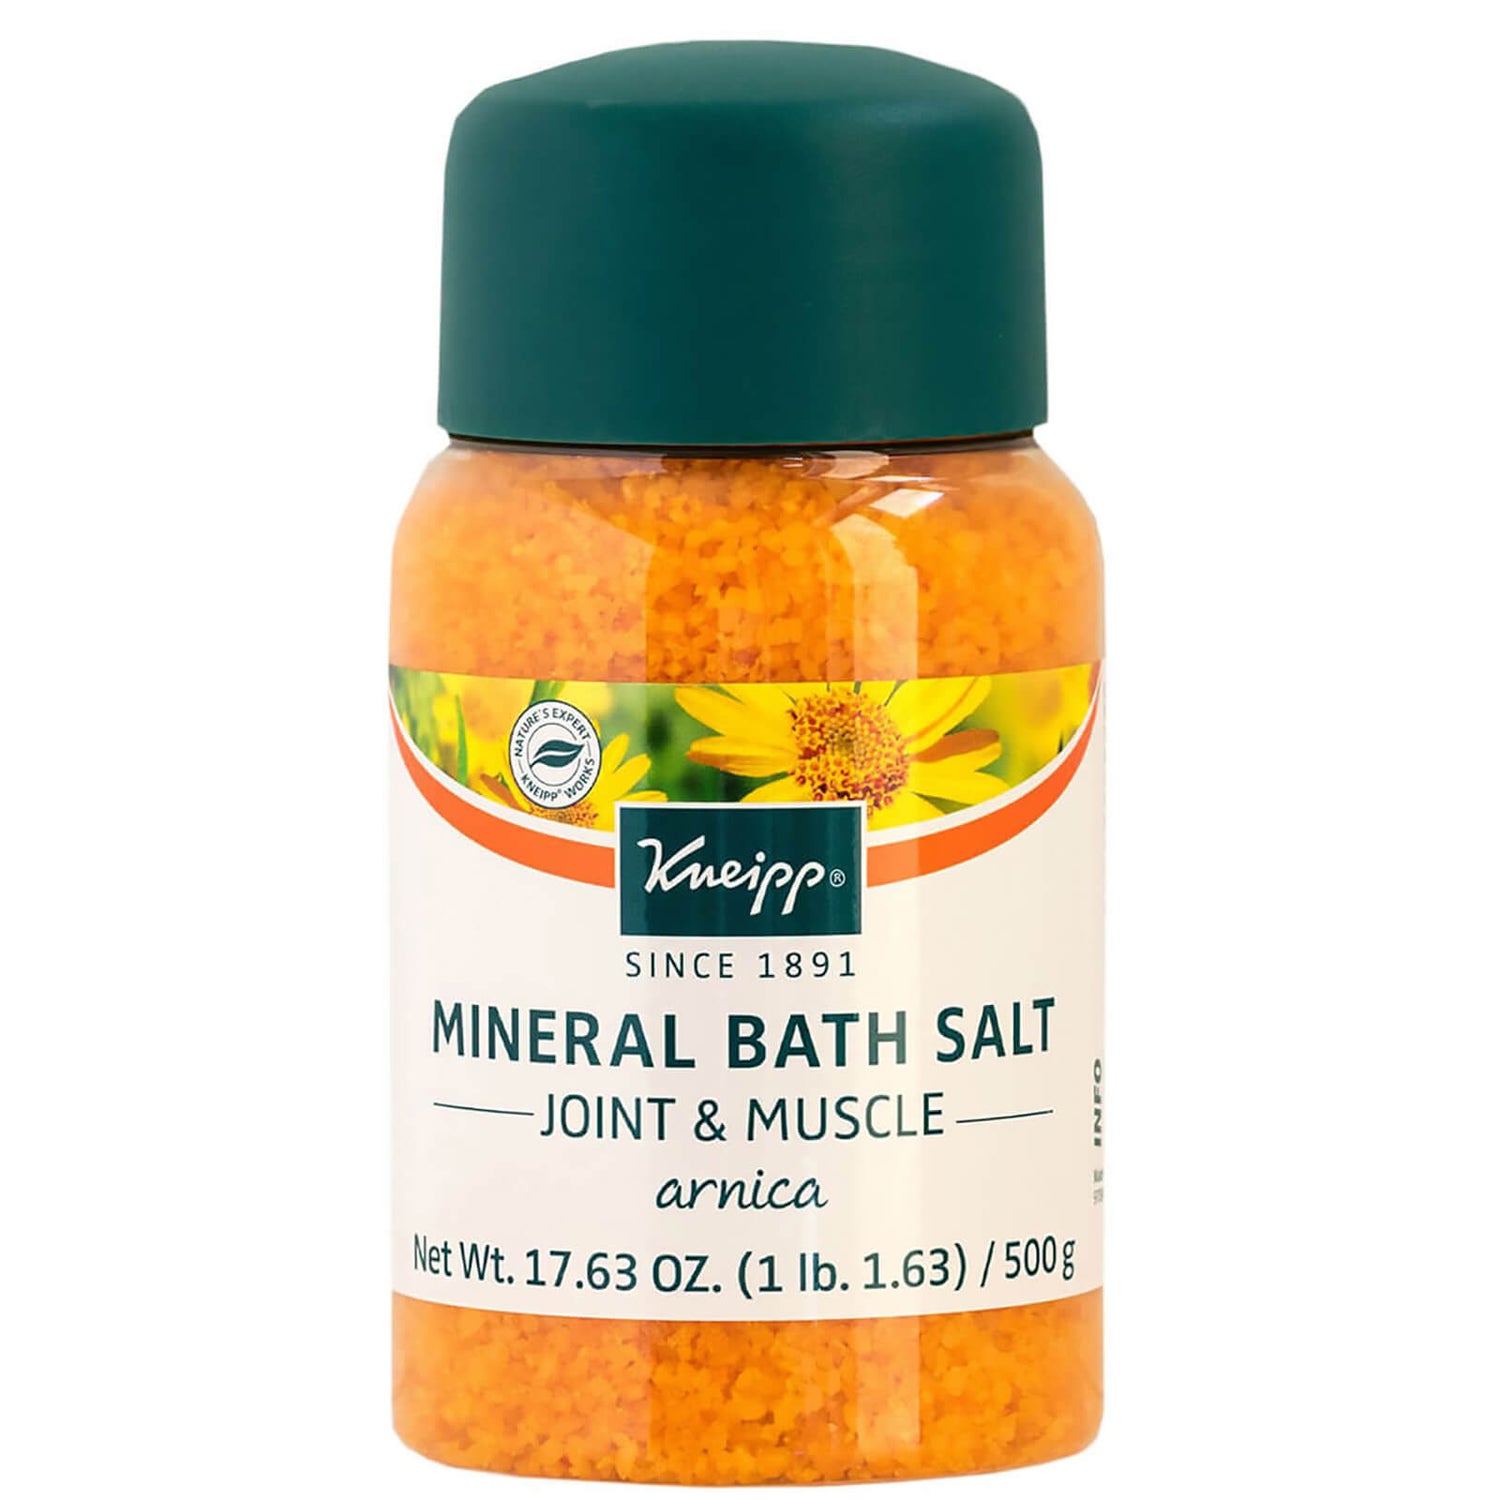 Kneipp Joint and Muscle Arnica Bath Salts (500g)